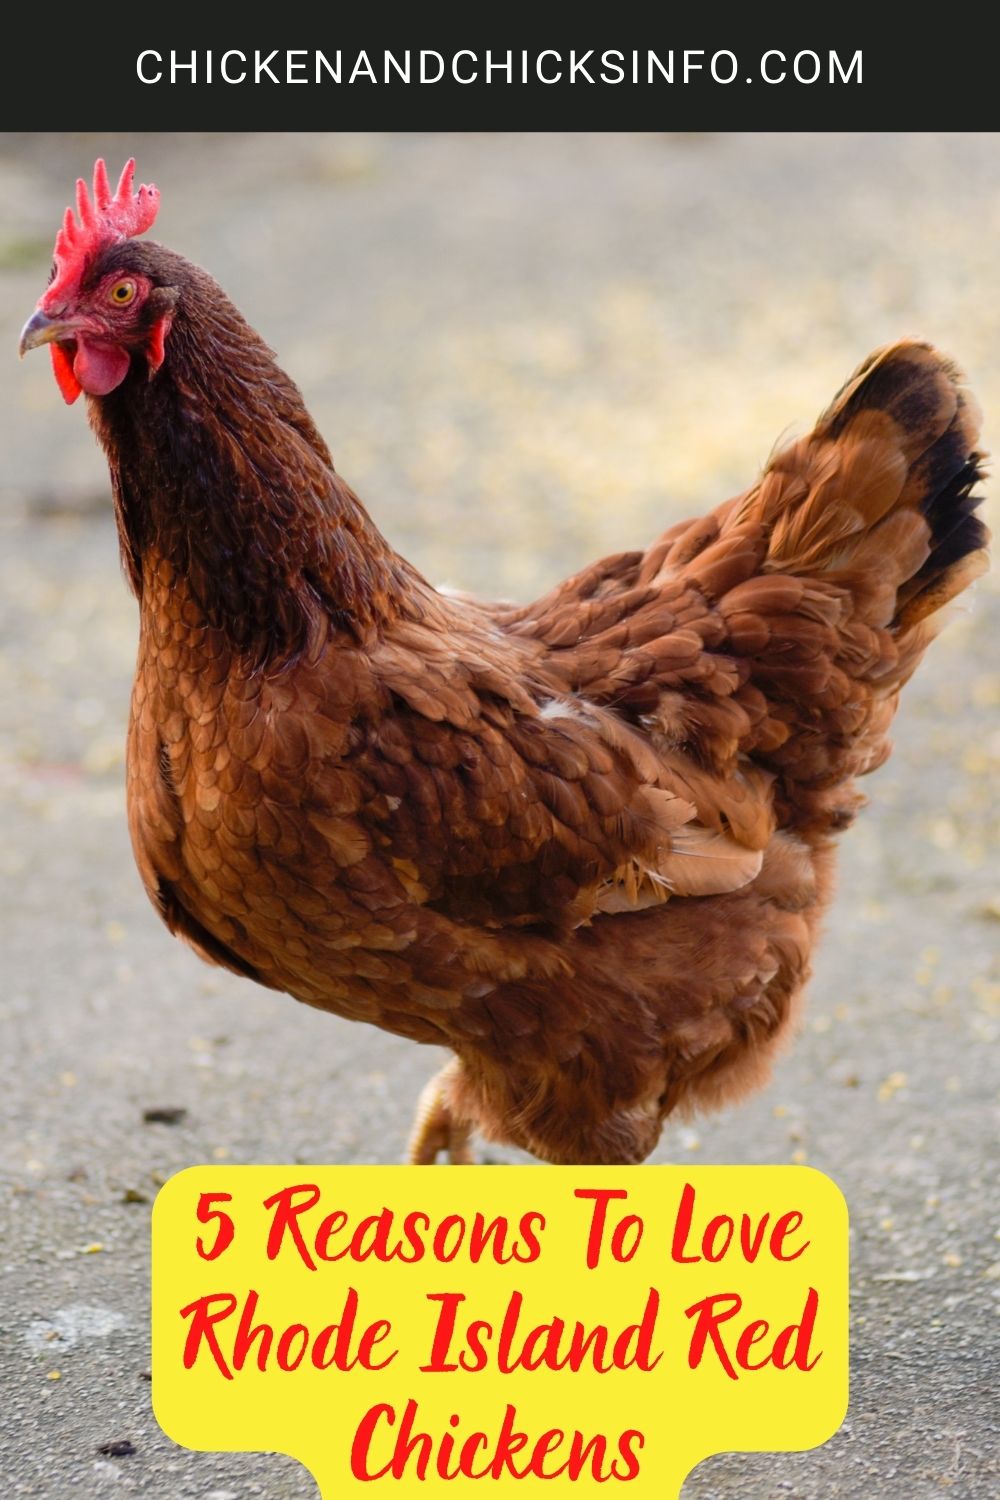 5 Reasons To Love Rhode Island Red Chickens poster.
